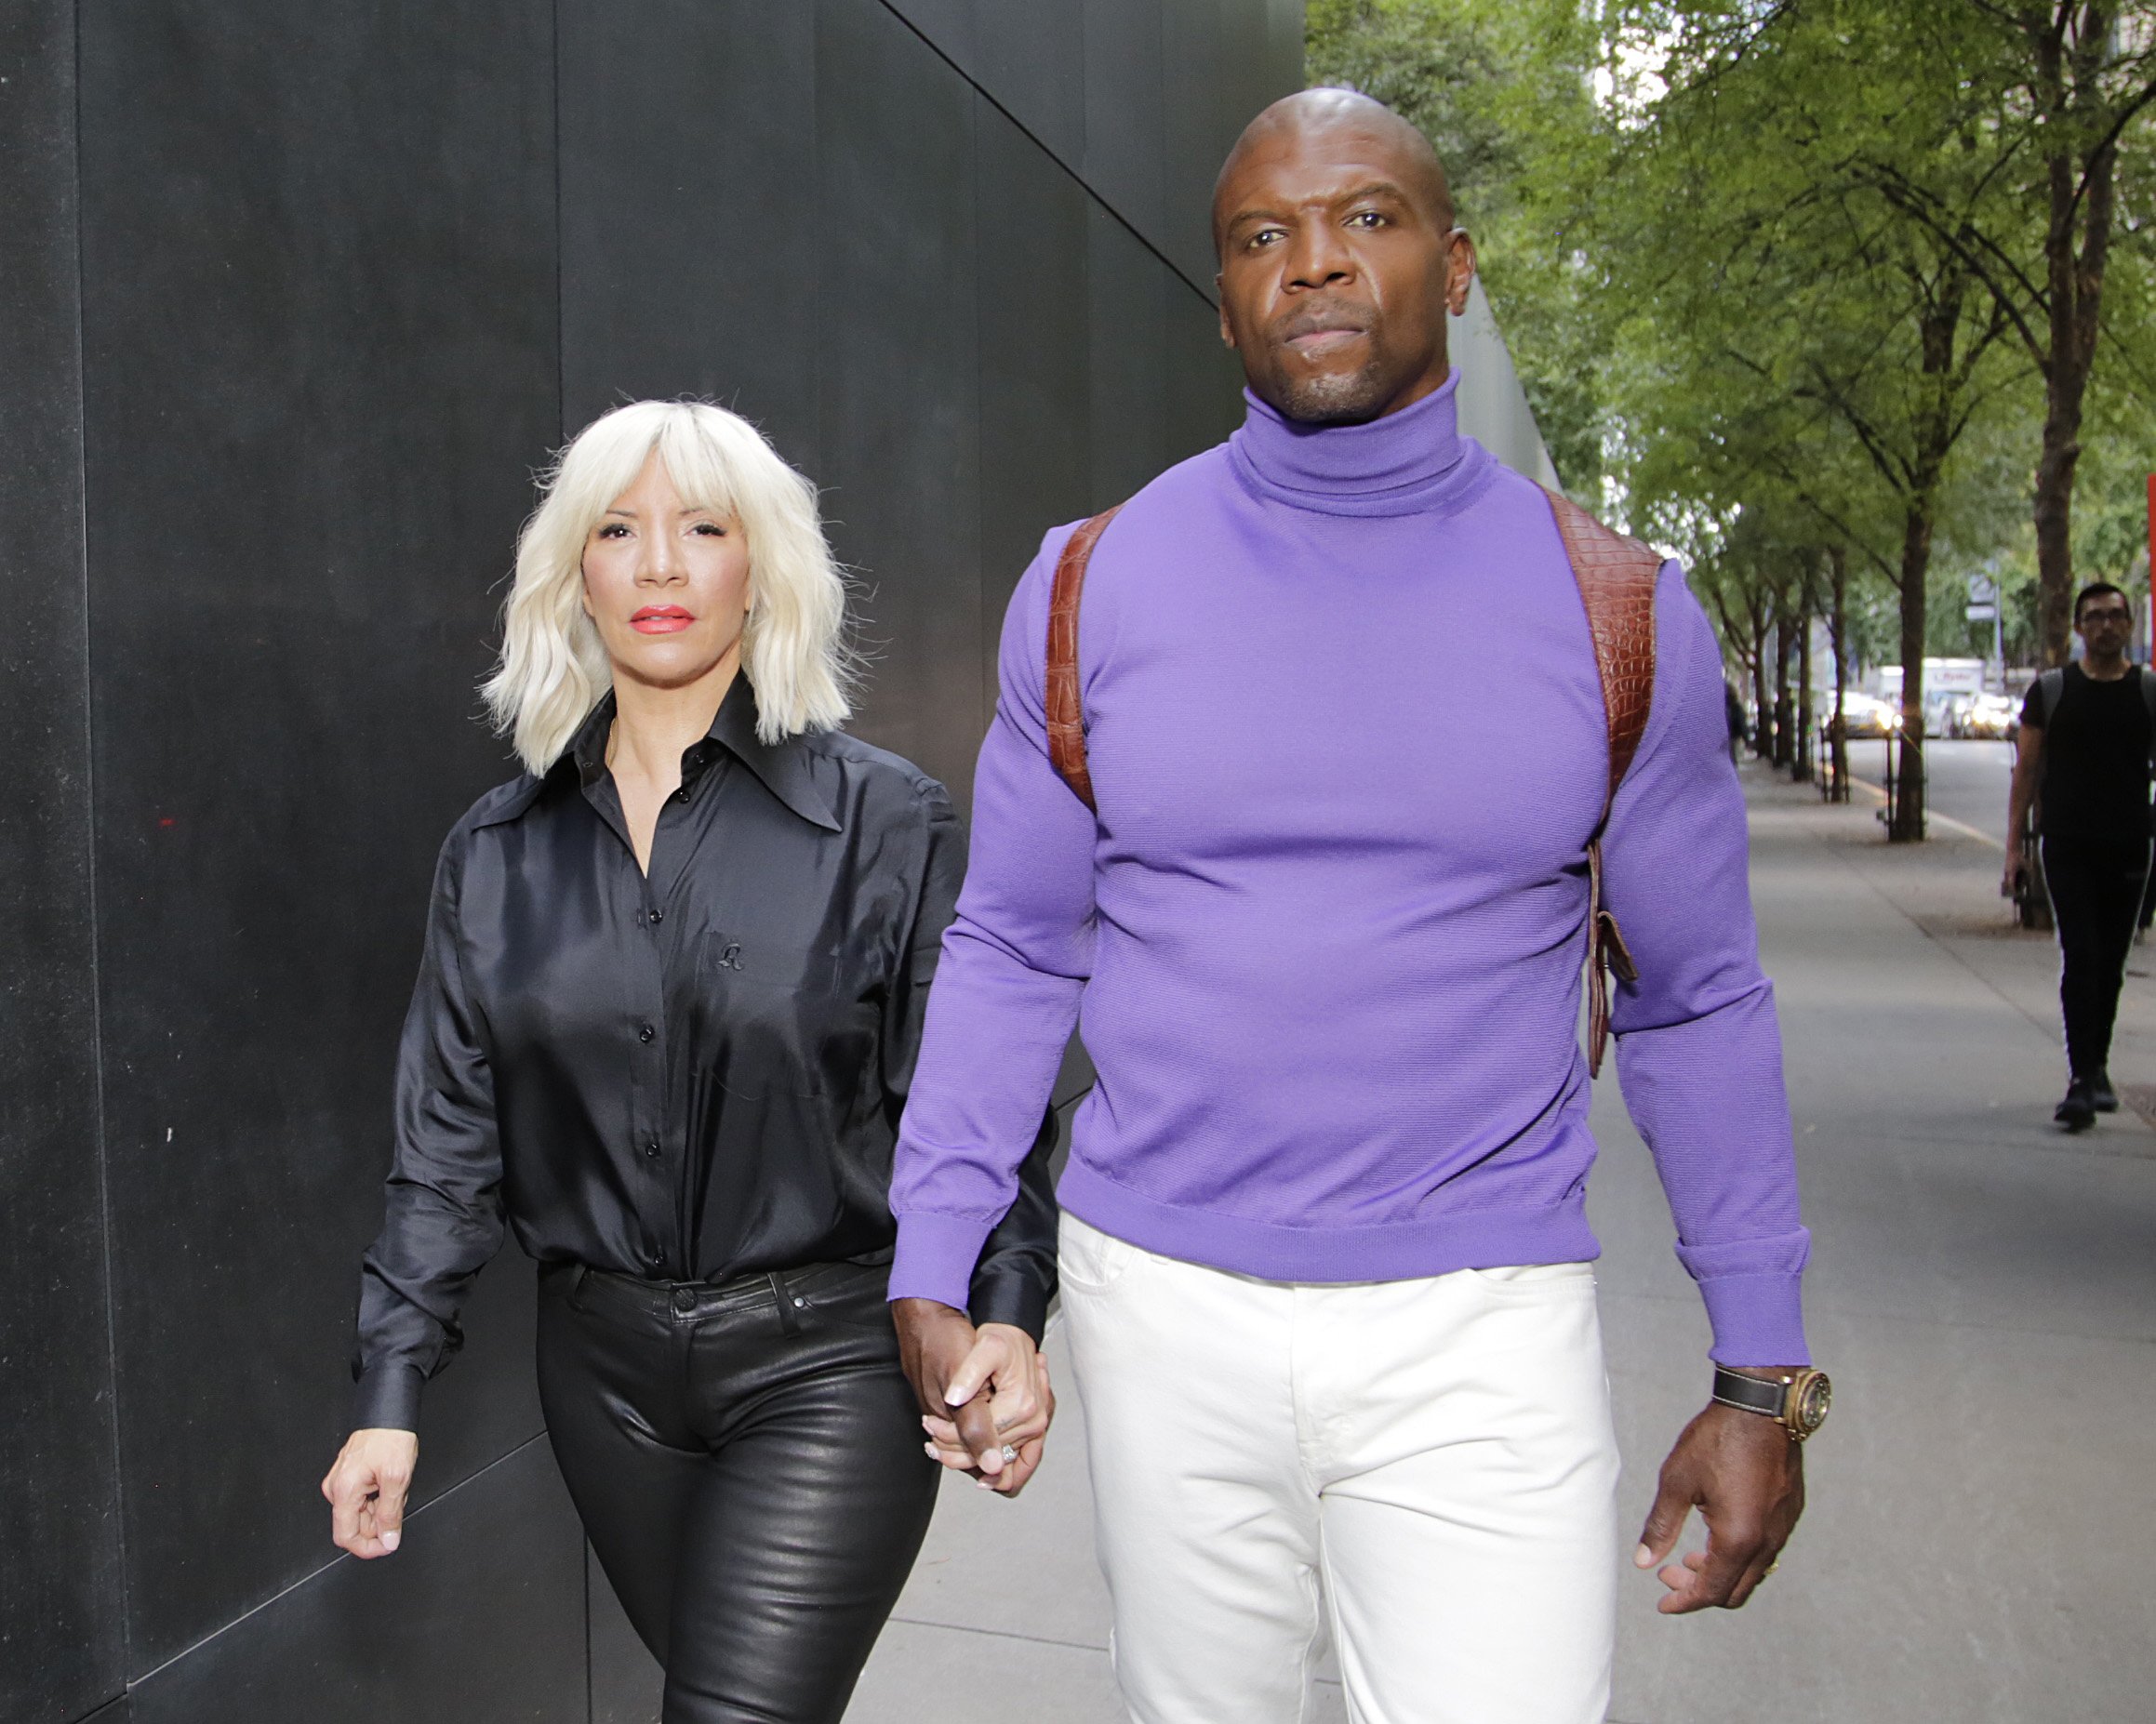 Rebecca King-Crews and Terry Crews are seen in Midtown during New York Fashion Week on September 10, 2021, in New York City. | Source: Getty Images